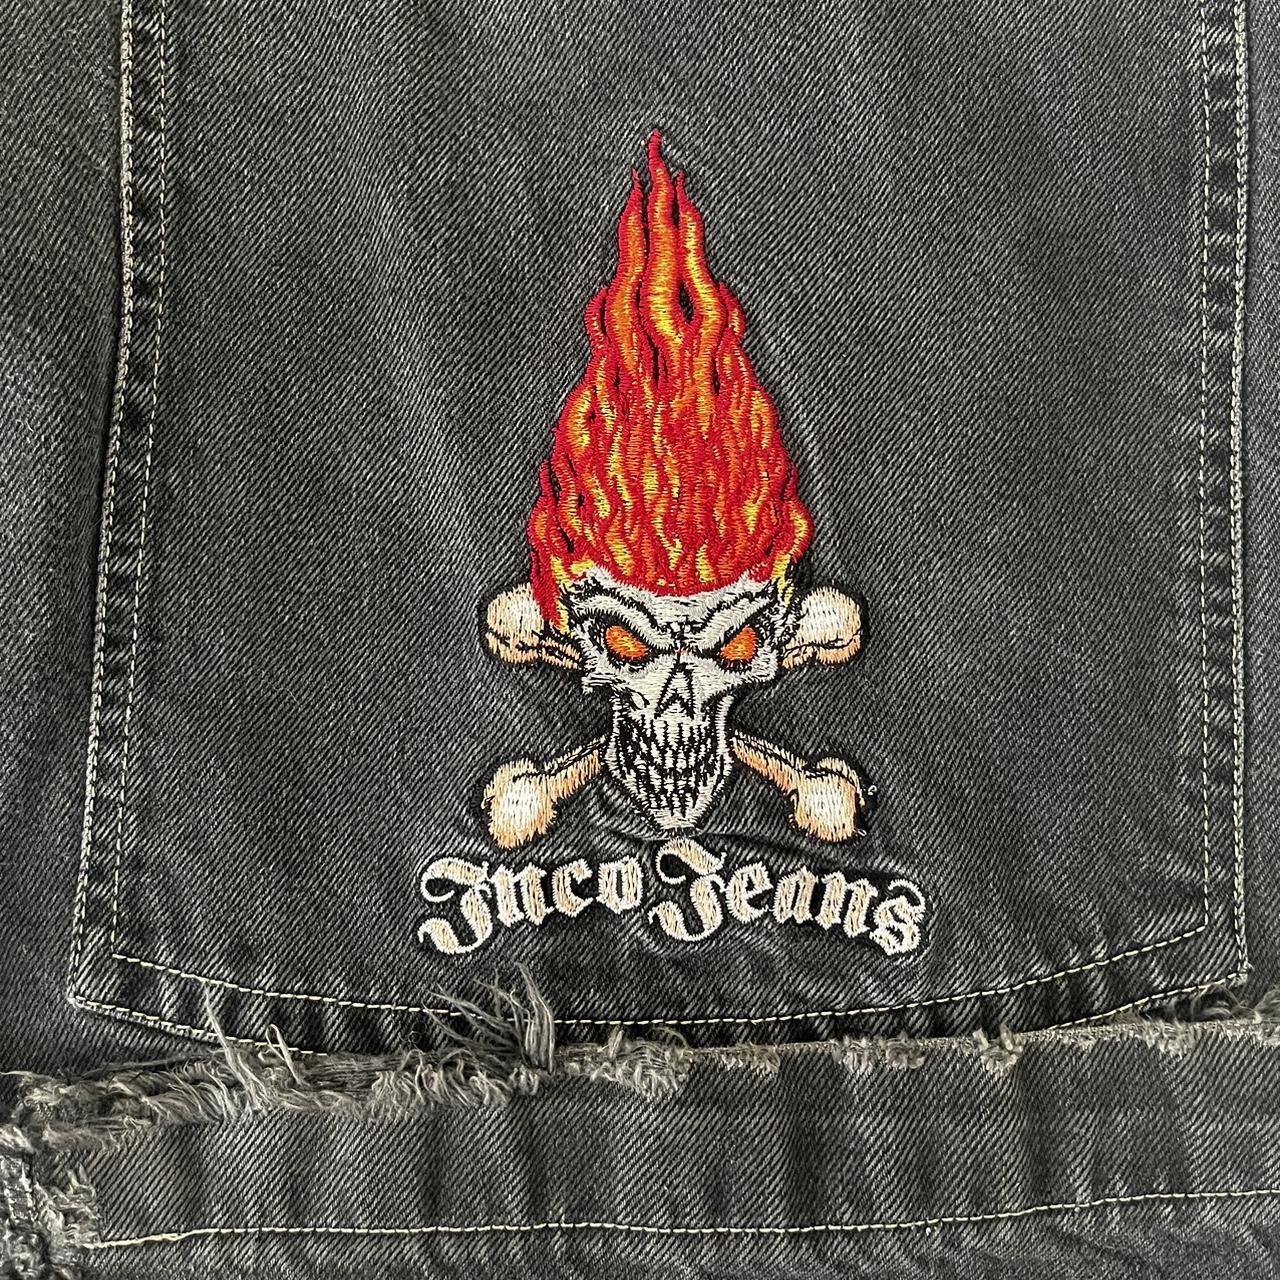 (TRIBAL) (GRAIL) flaming skull jnco’s. i am not in a... - Depop